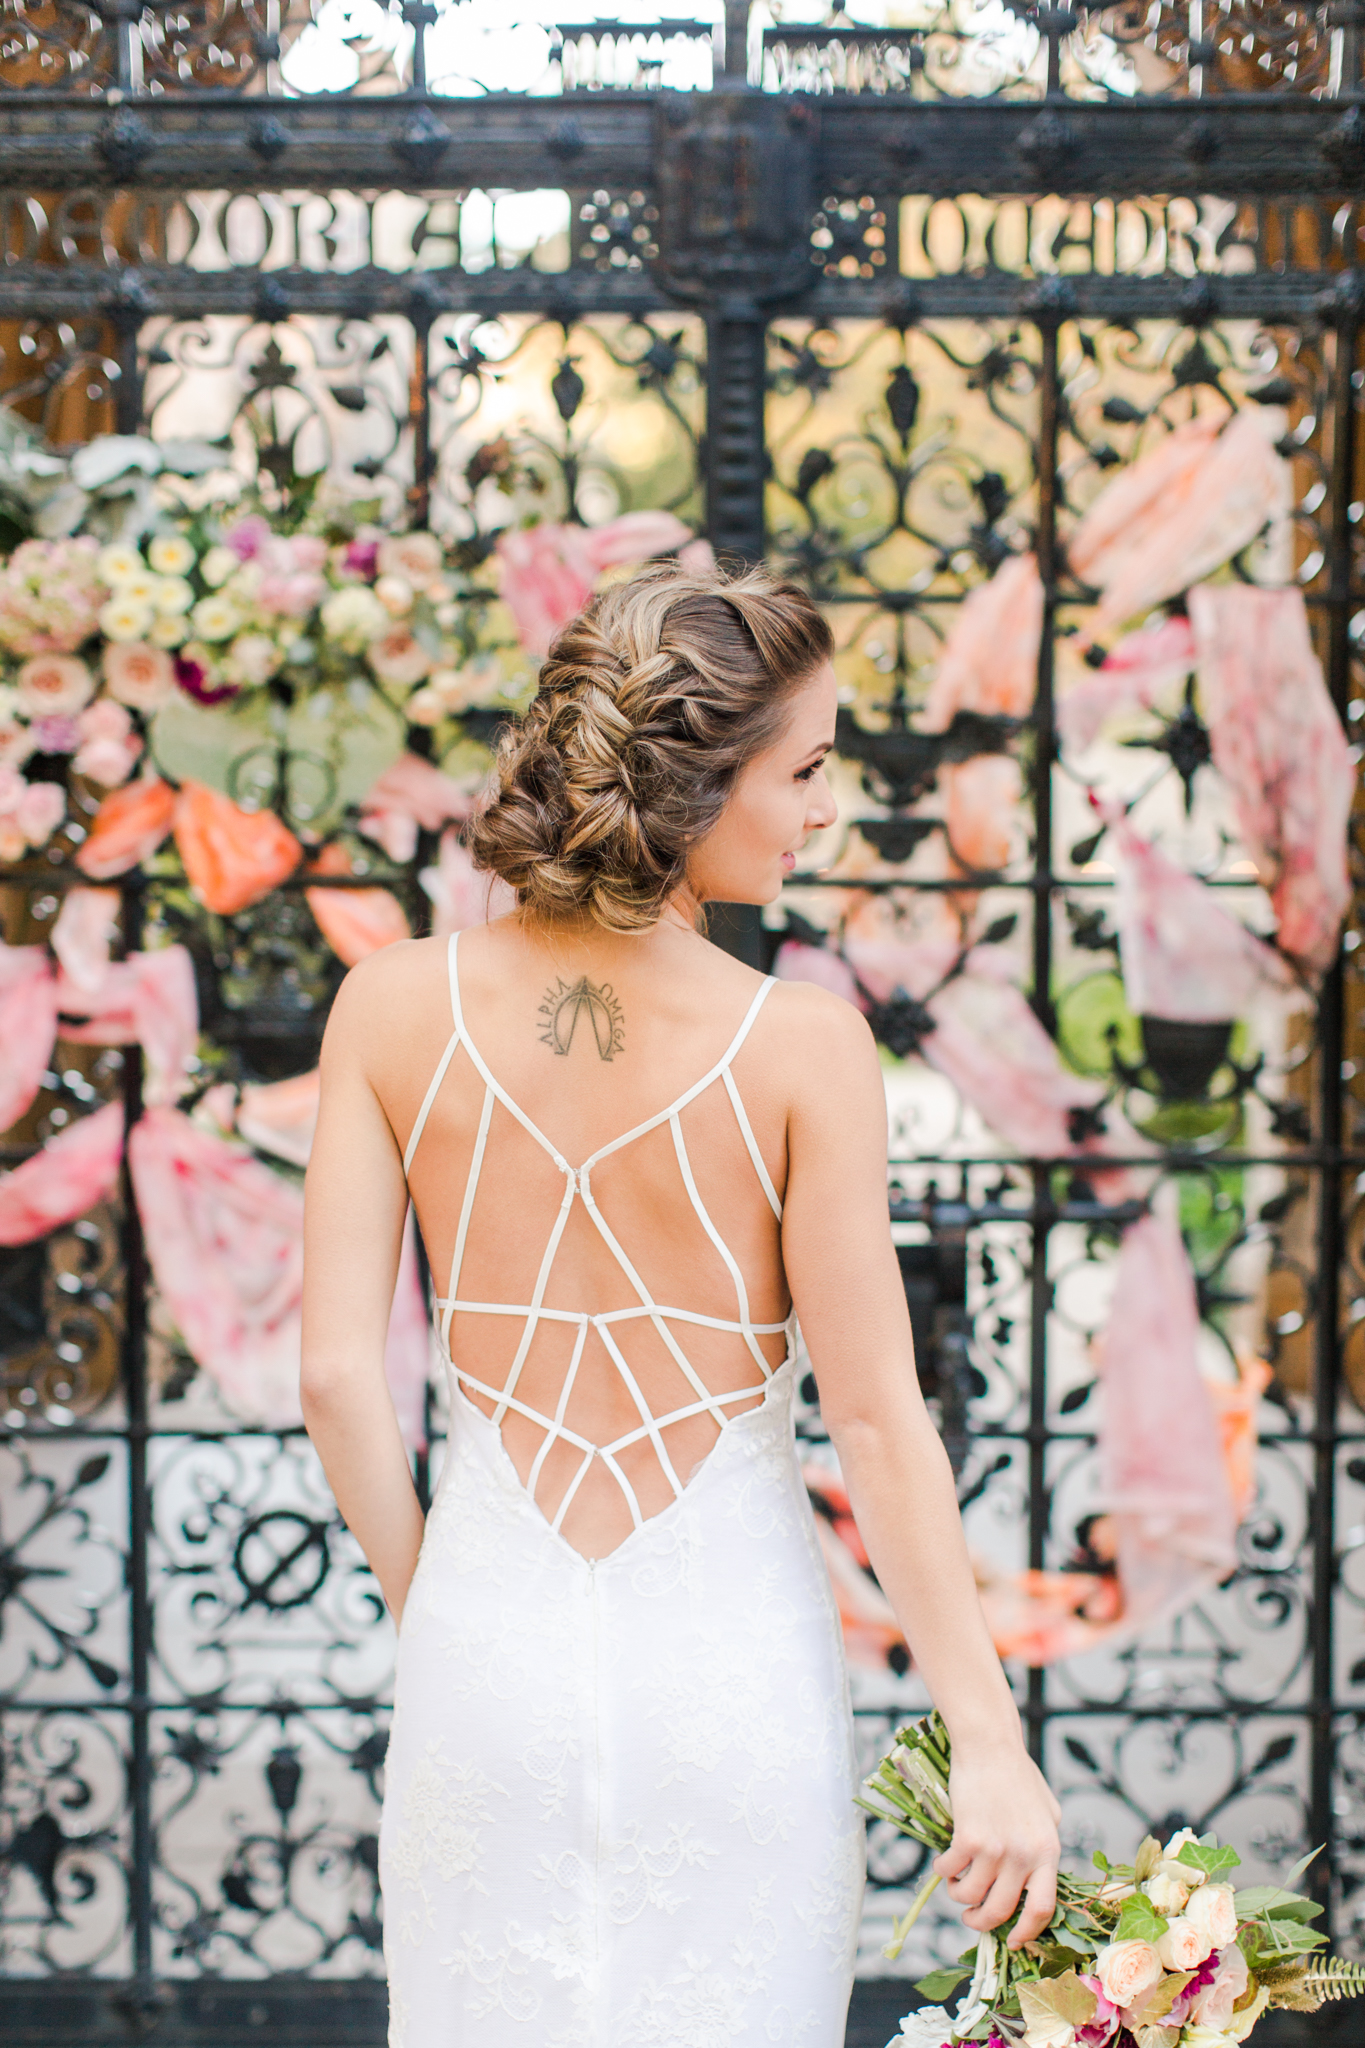 Brides intricate back strap dress with delicate lace - Pearl Weddings & Events